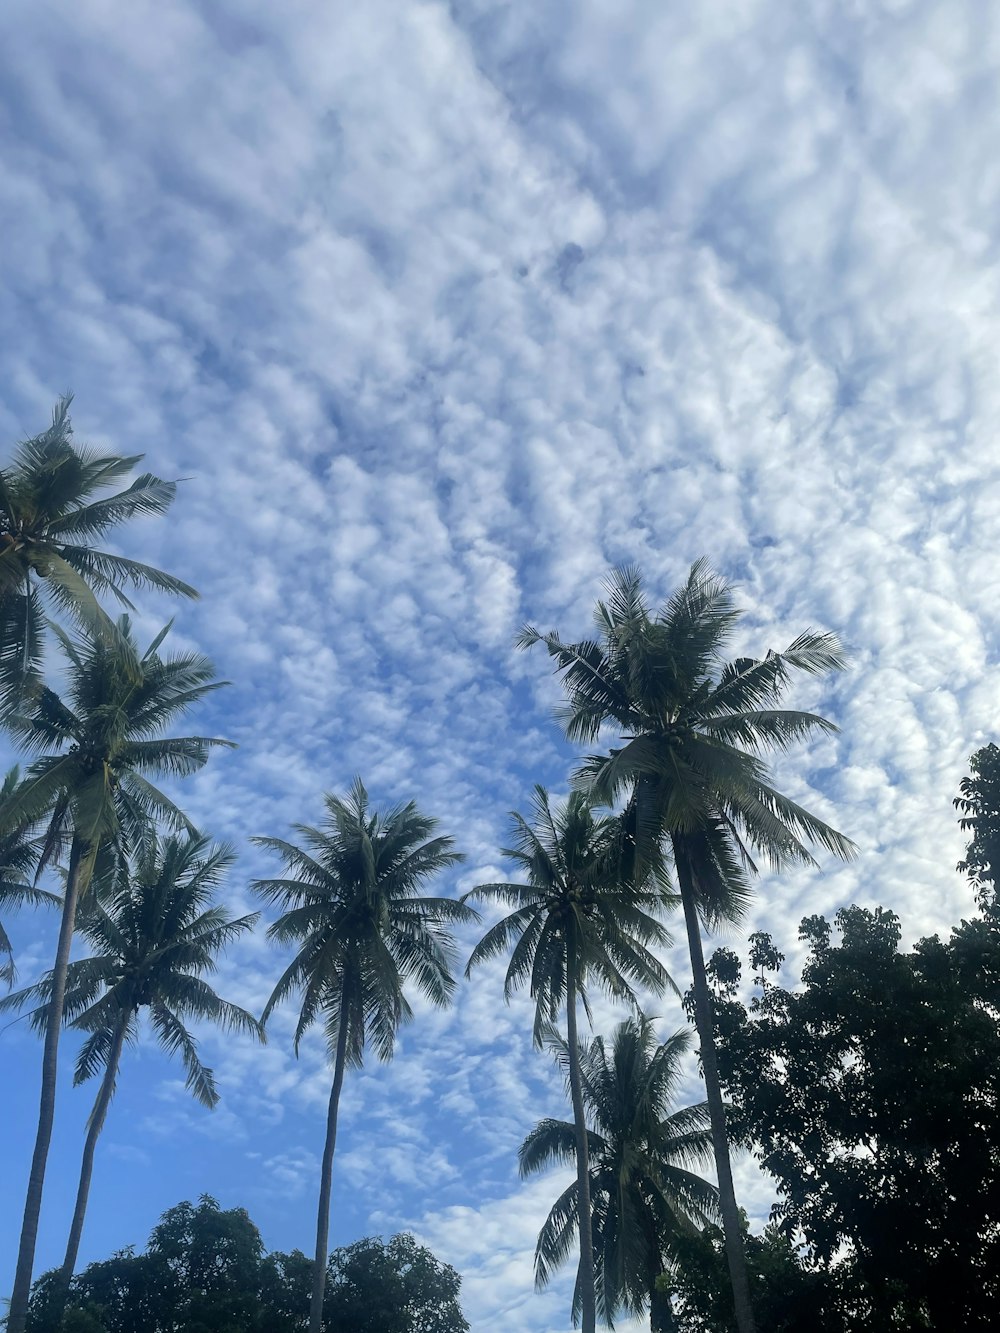 a group of palm trees under a cloudy blue sky